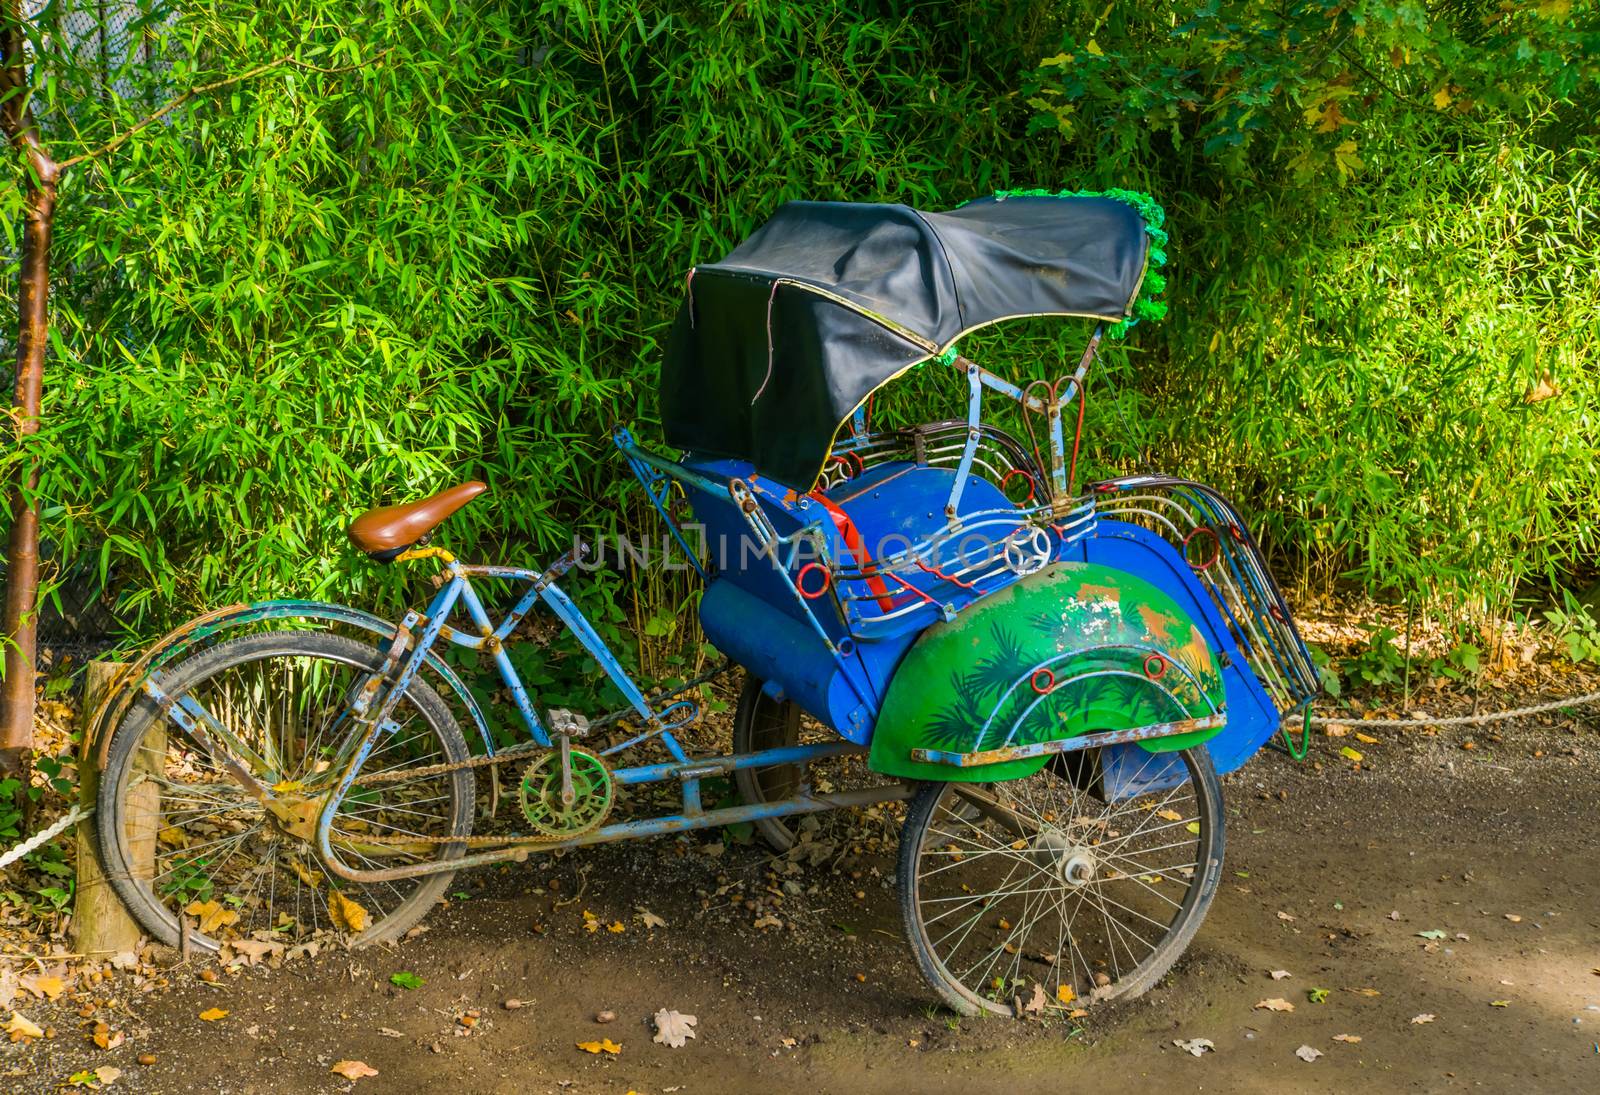 Side view of a traditional Asian cycle rickshaw, Vintage transportation vehicle from Asia by charlottebleijenberg